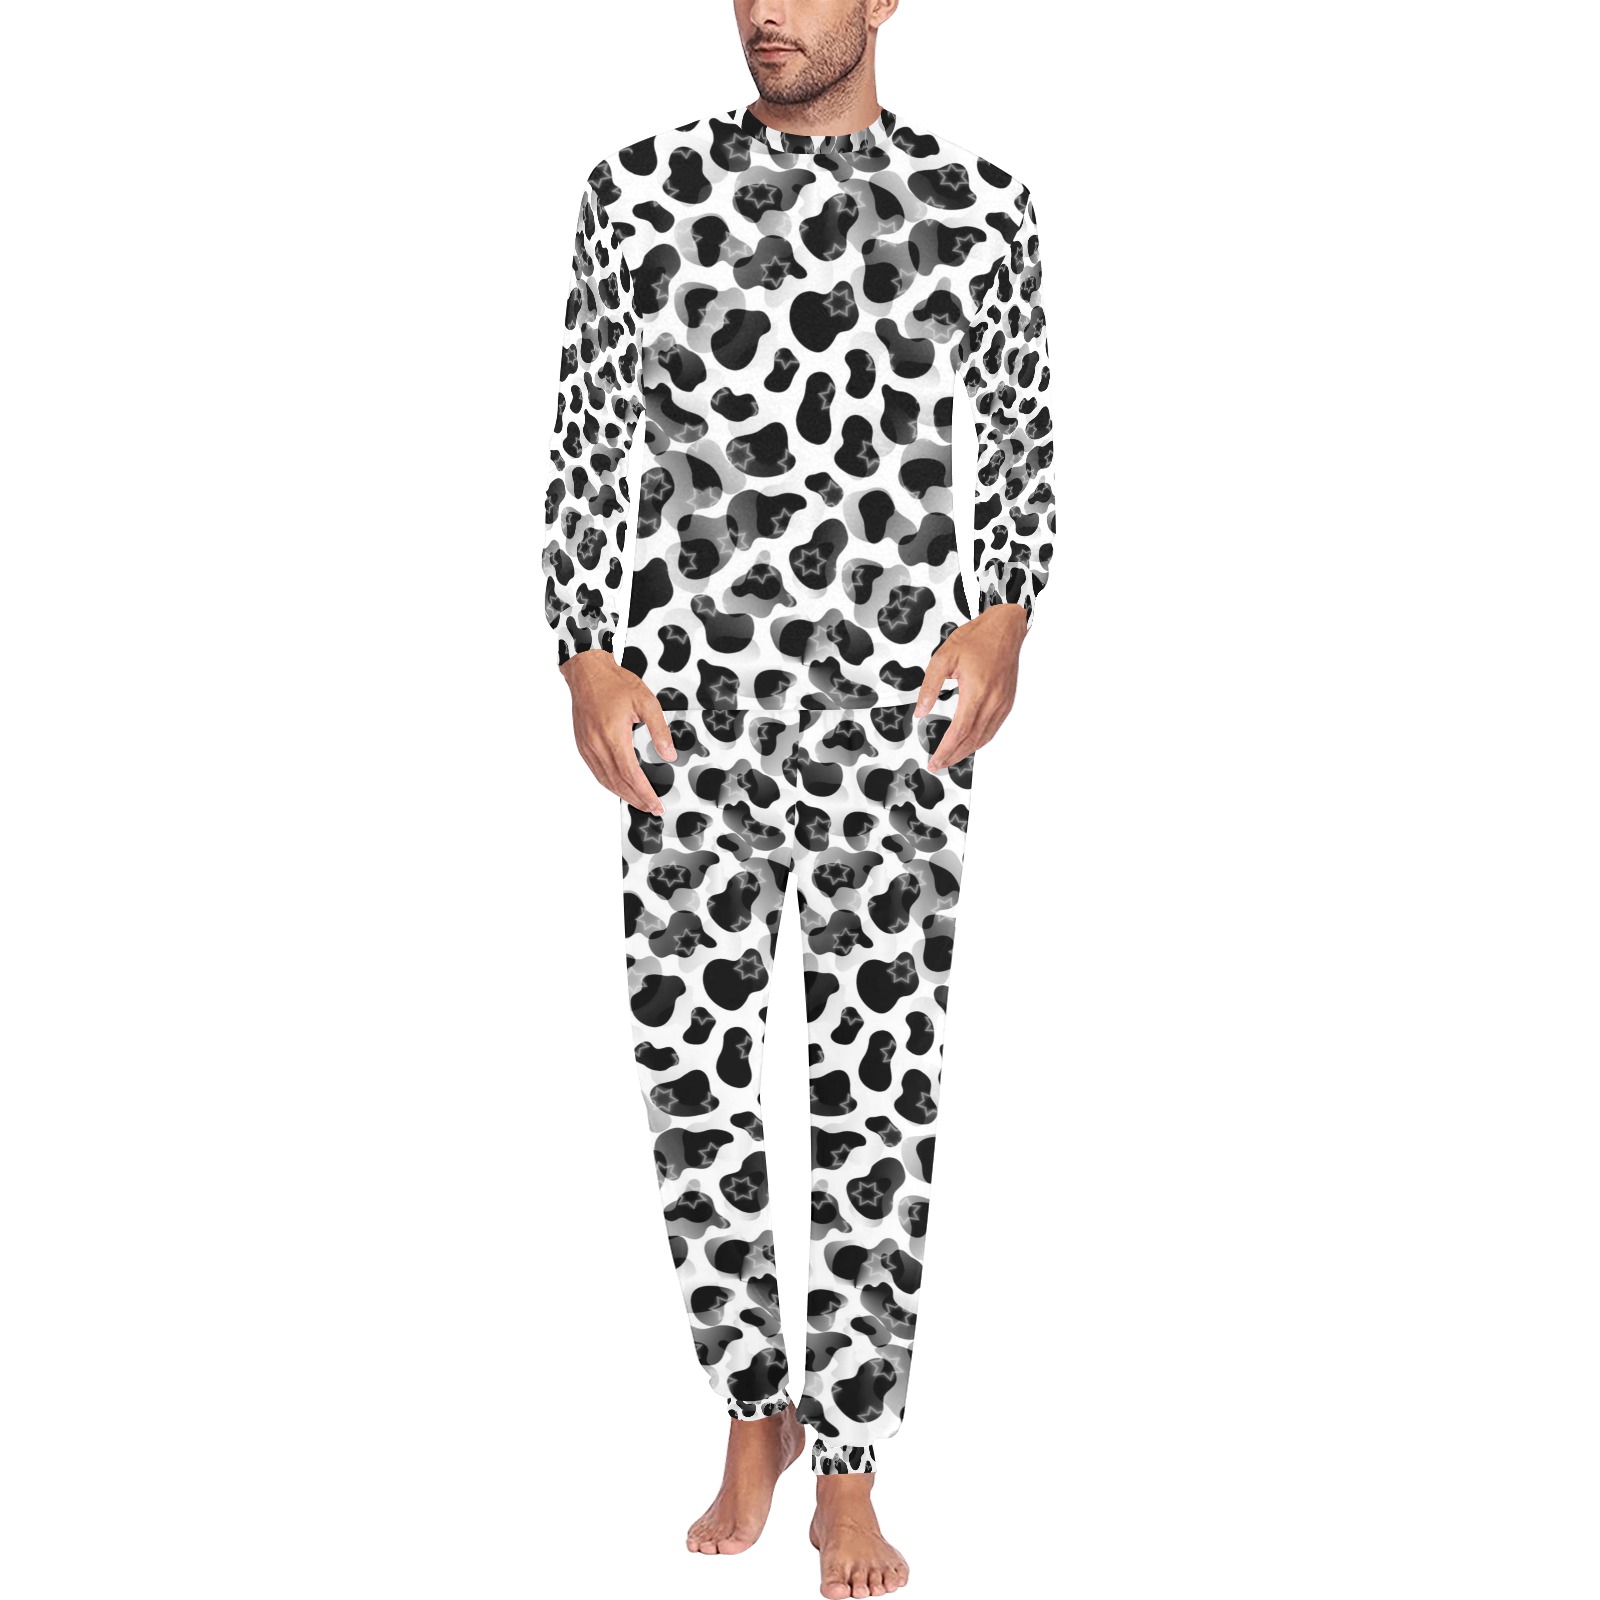 Cowhide by Artdream Men's All Over Print Pajama Set with Custom Cuff